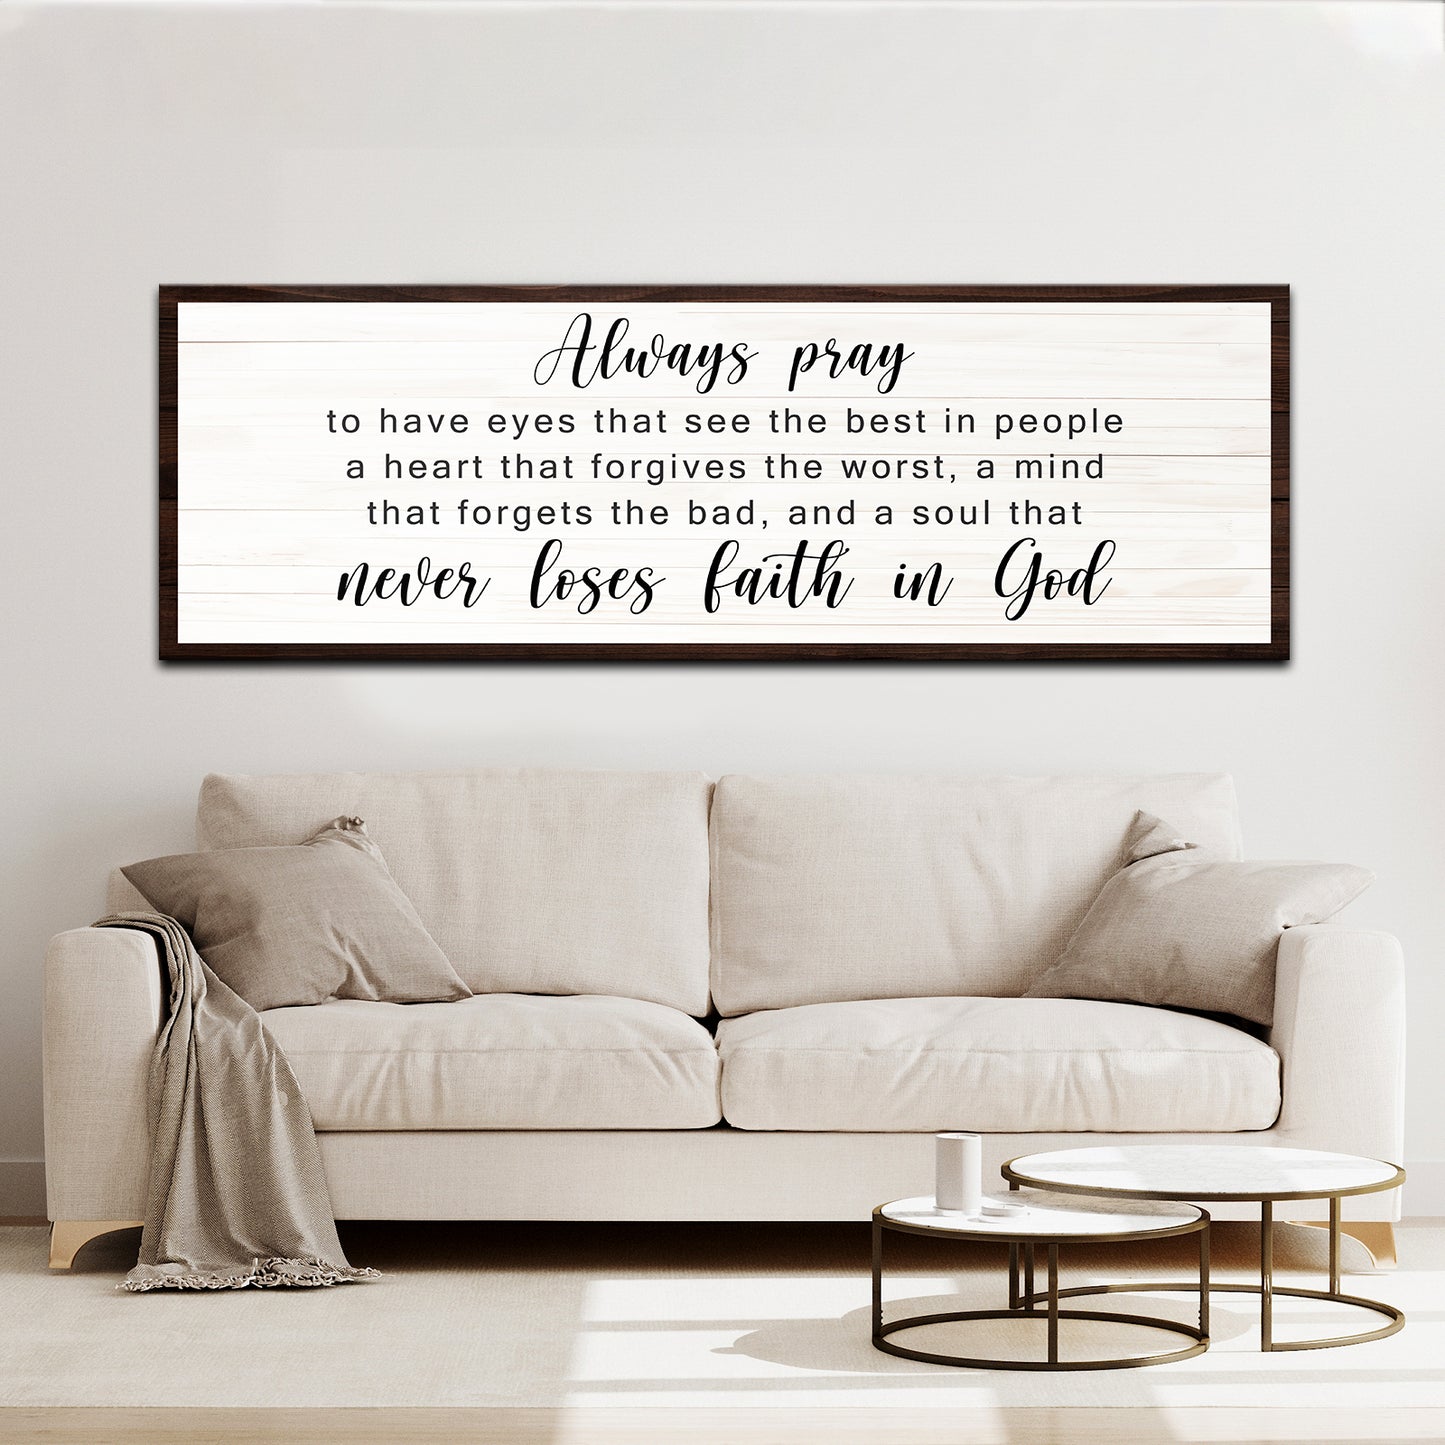 Never Lose Faith in God Sign Style 2 - Image by Tailored Canvases